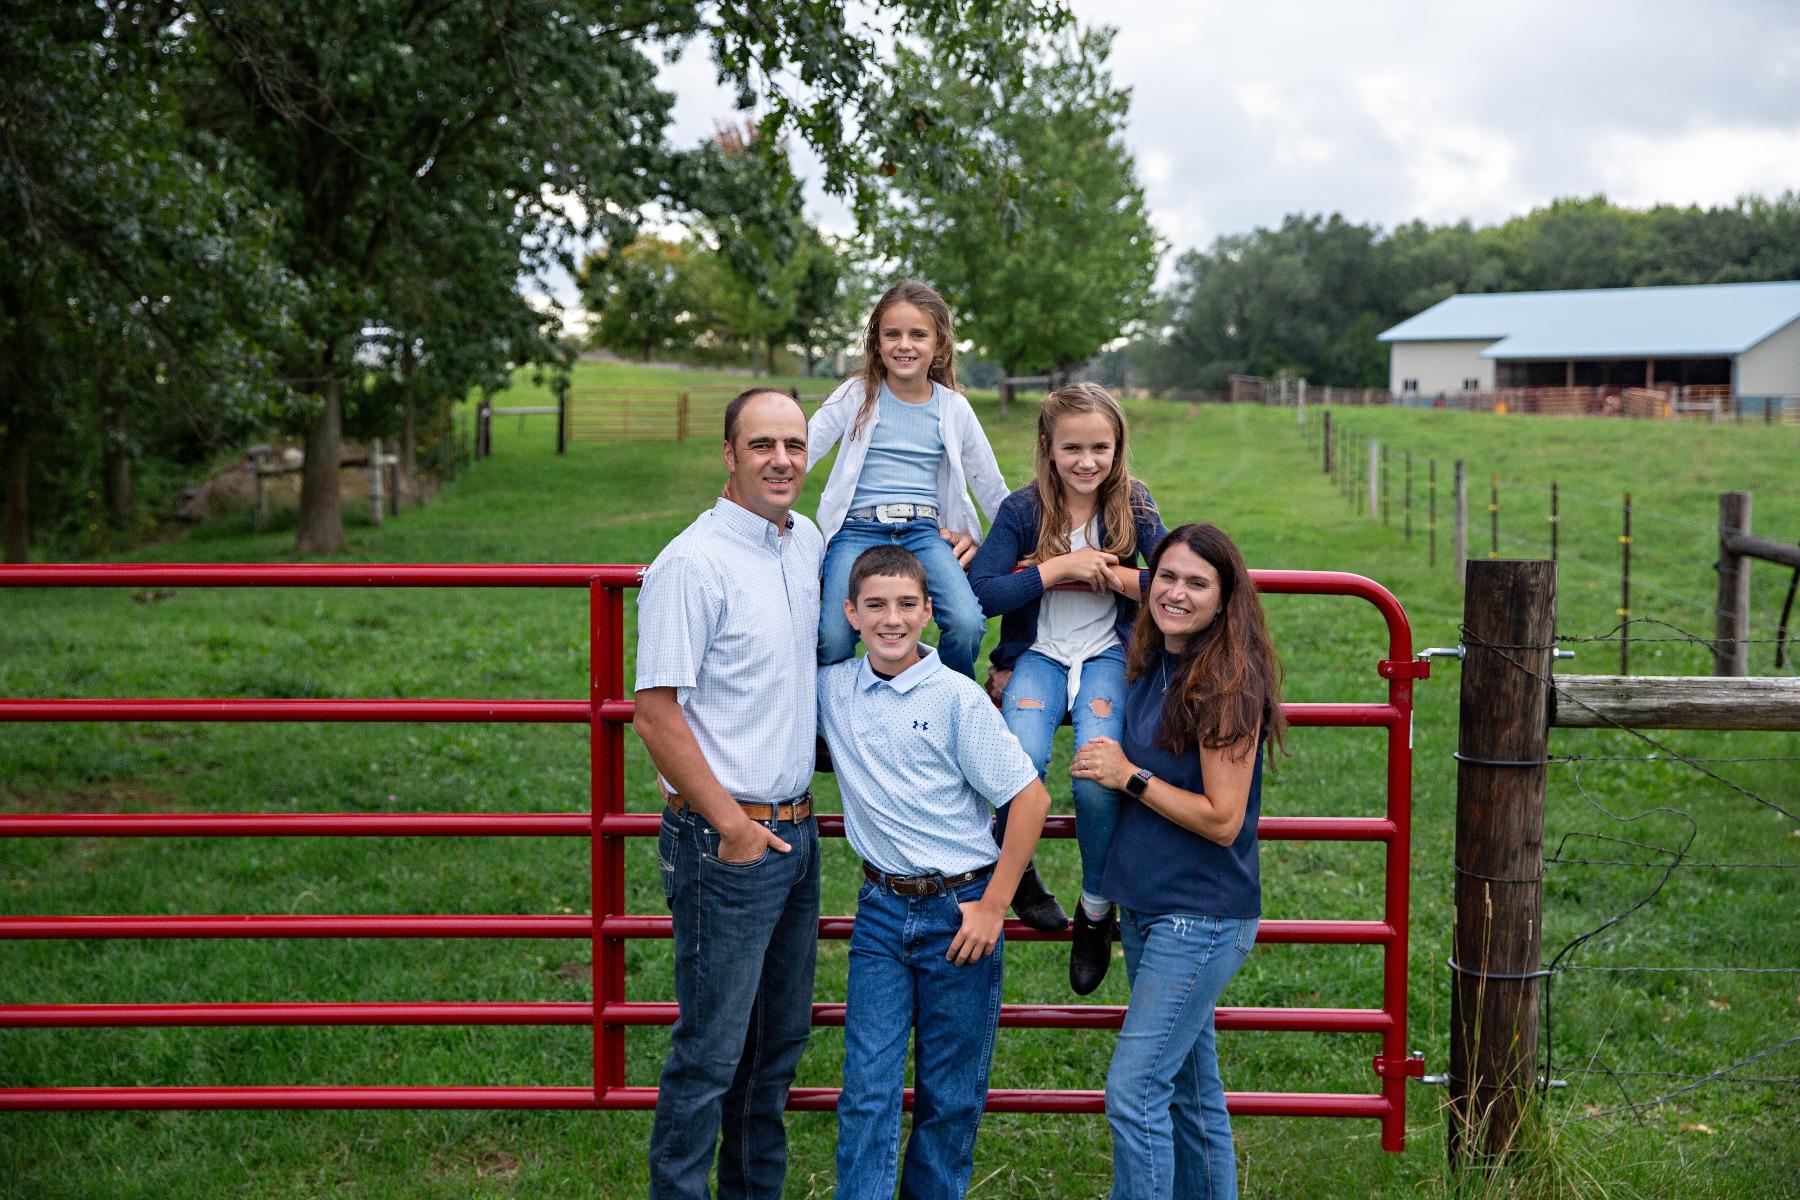 family of 5 pose on a red gate for a family photo on their farm